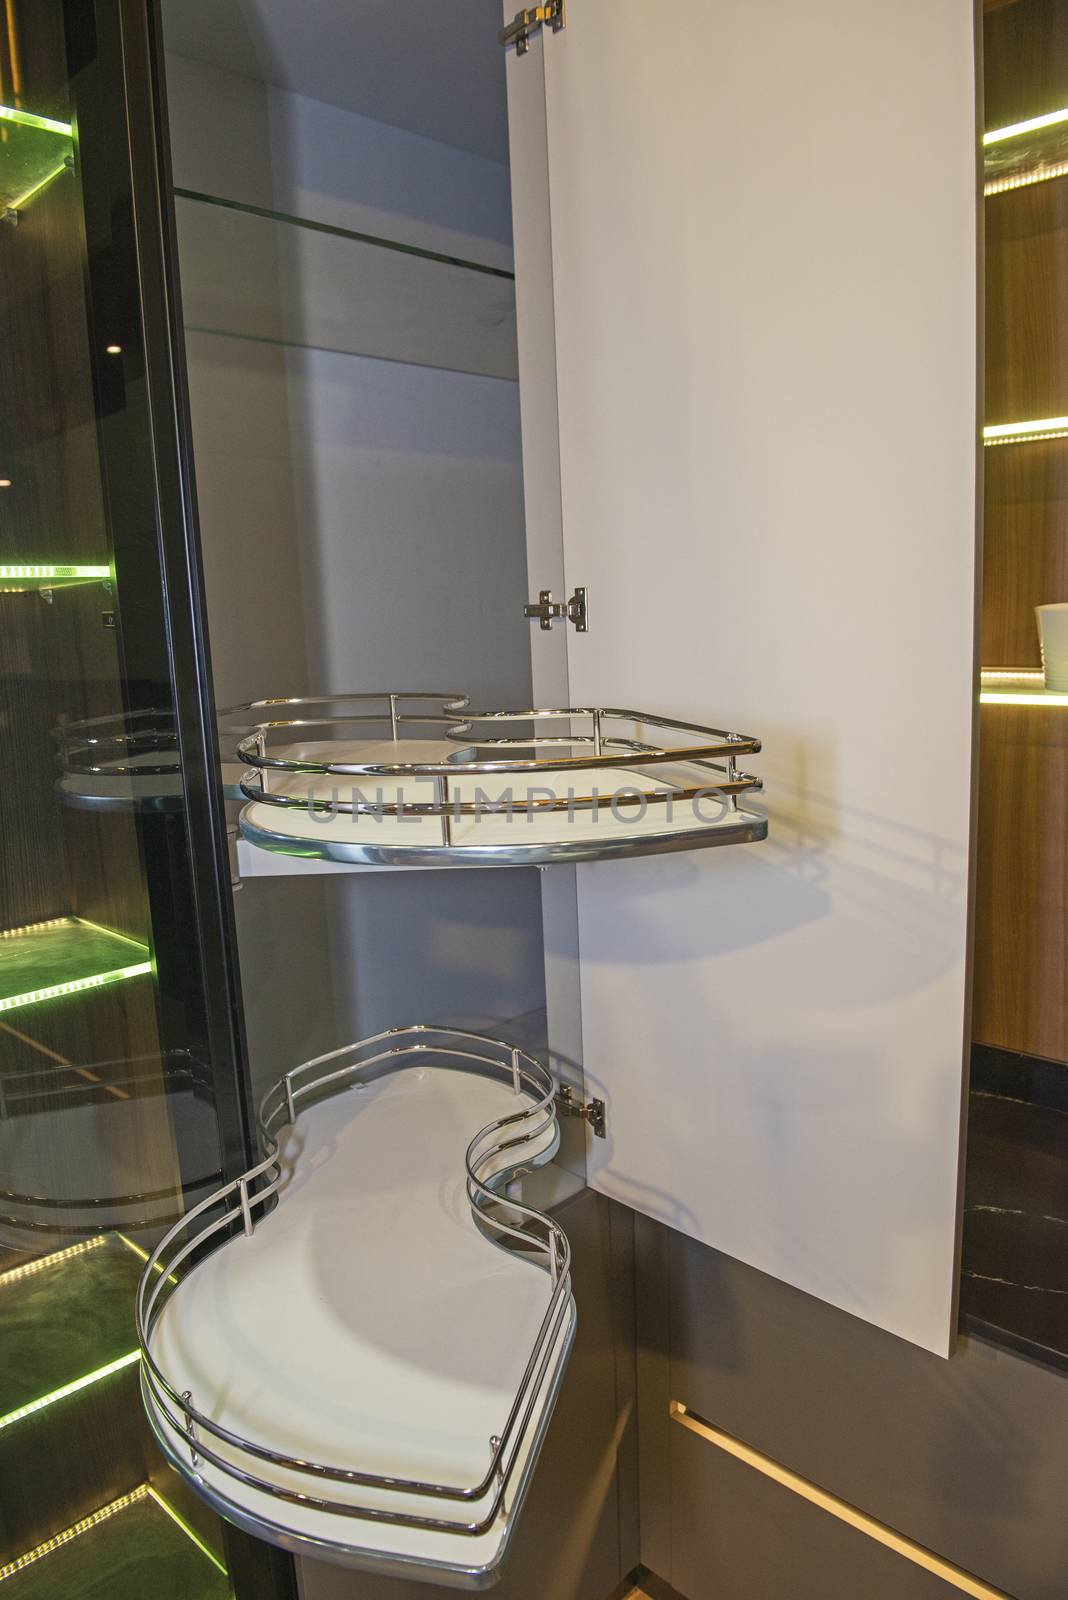 Interior design decor of kitchen in luxury apartment showing closeup detail of sliding carousel cupboard with shelves